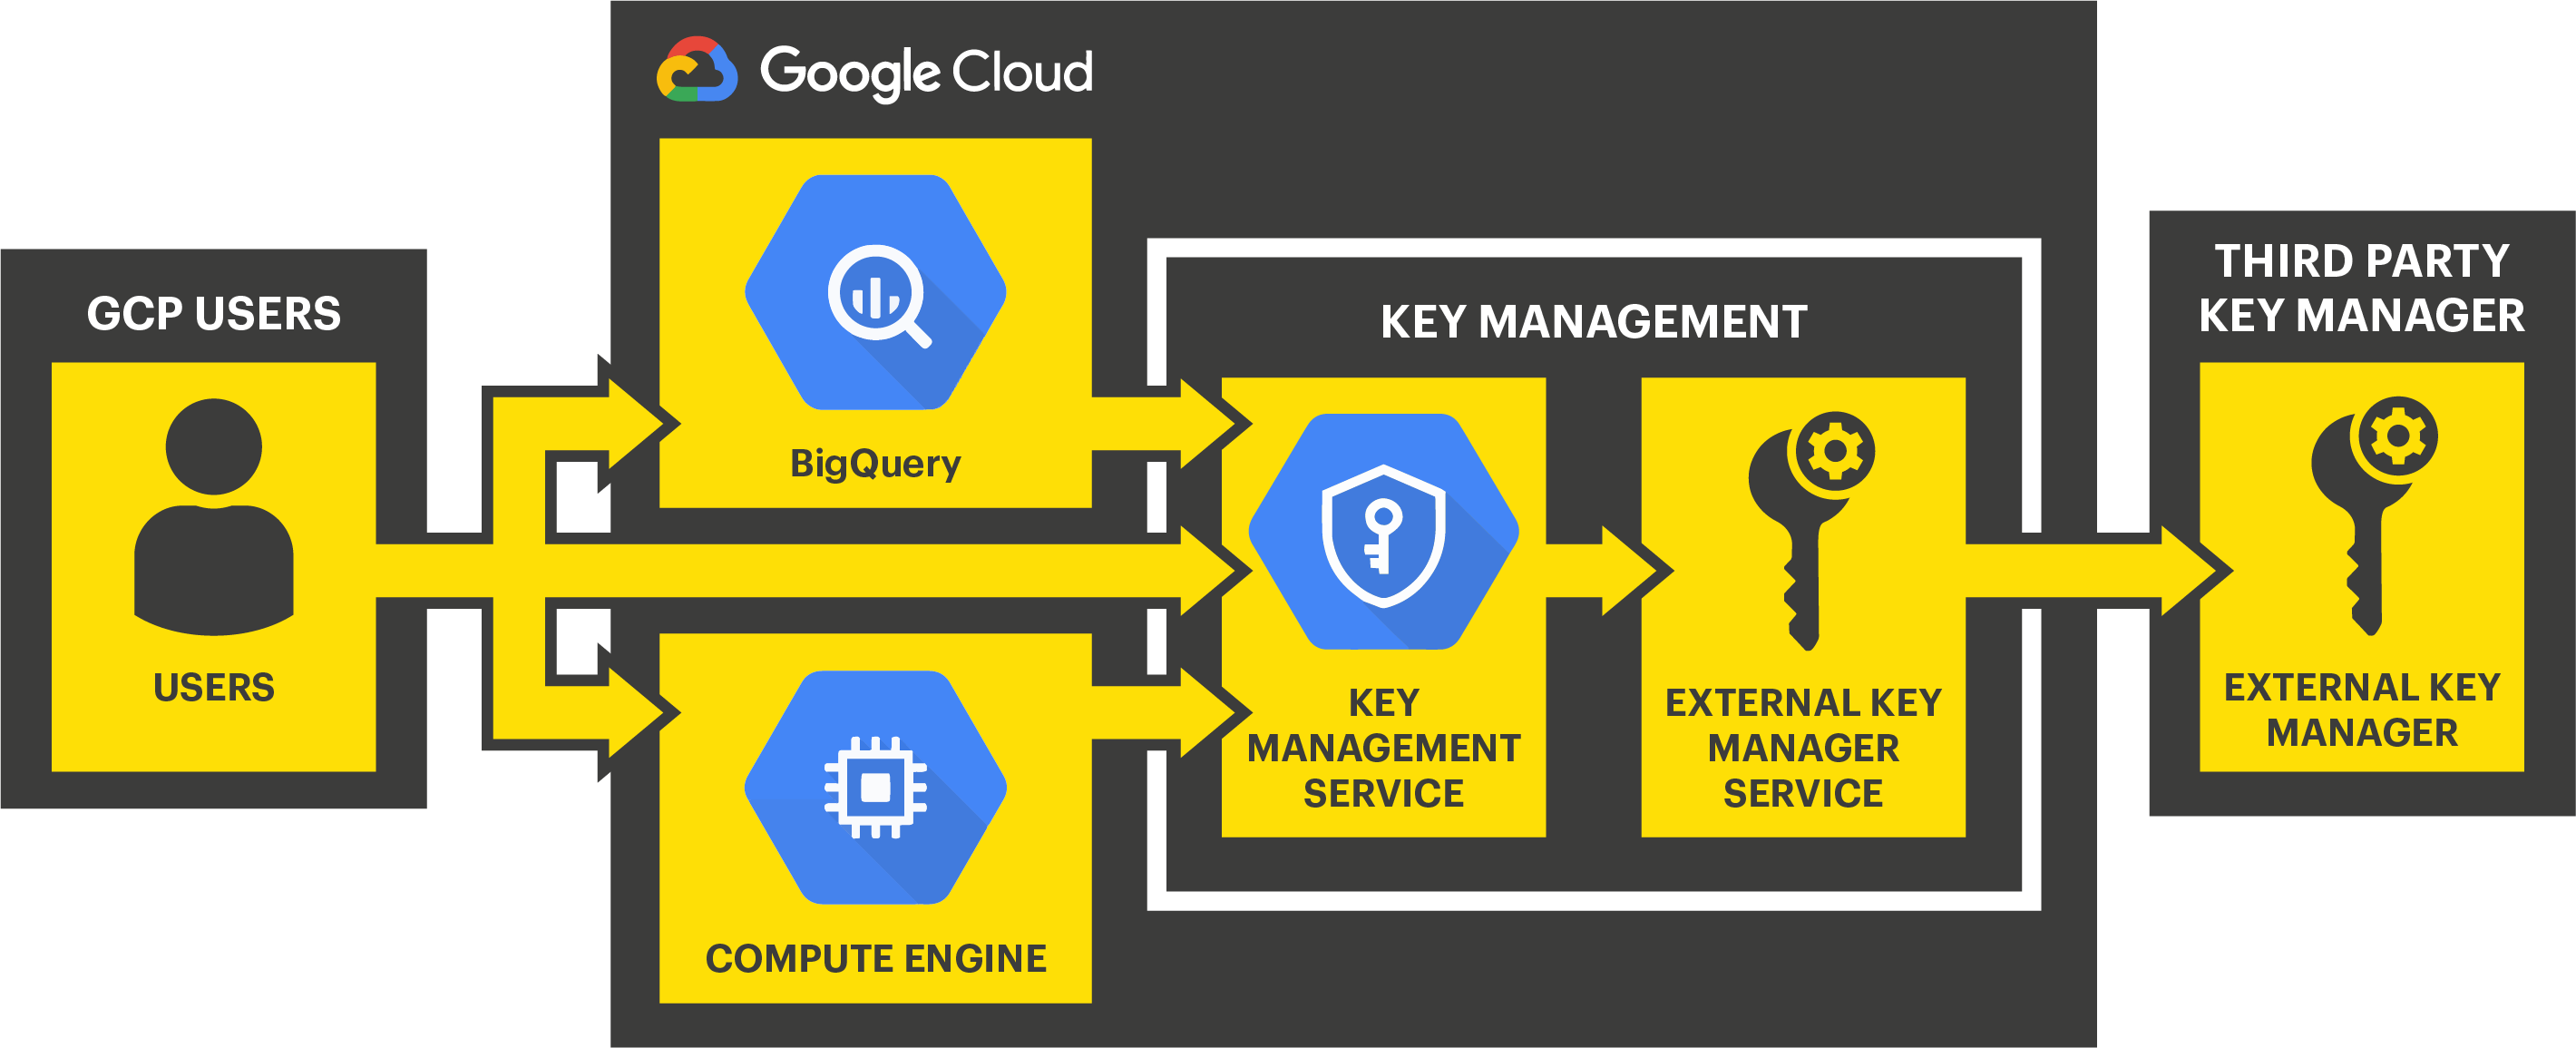 SvKMS with Google Cloud EKM